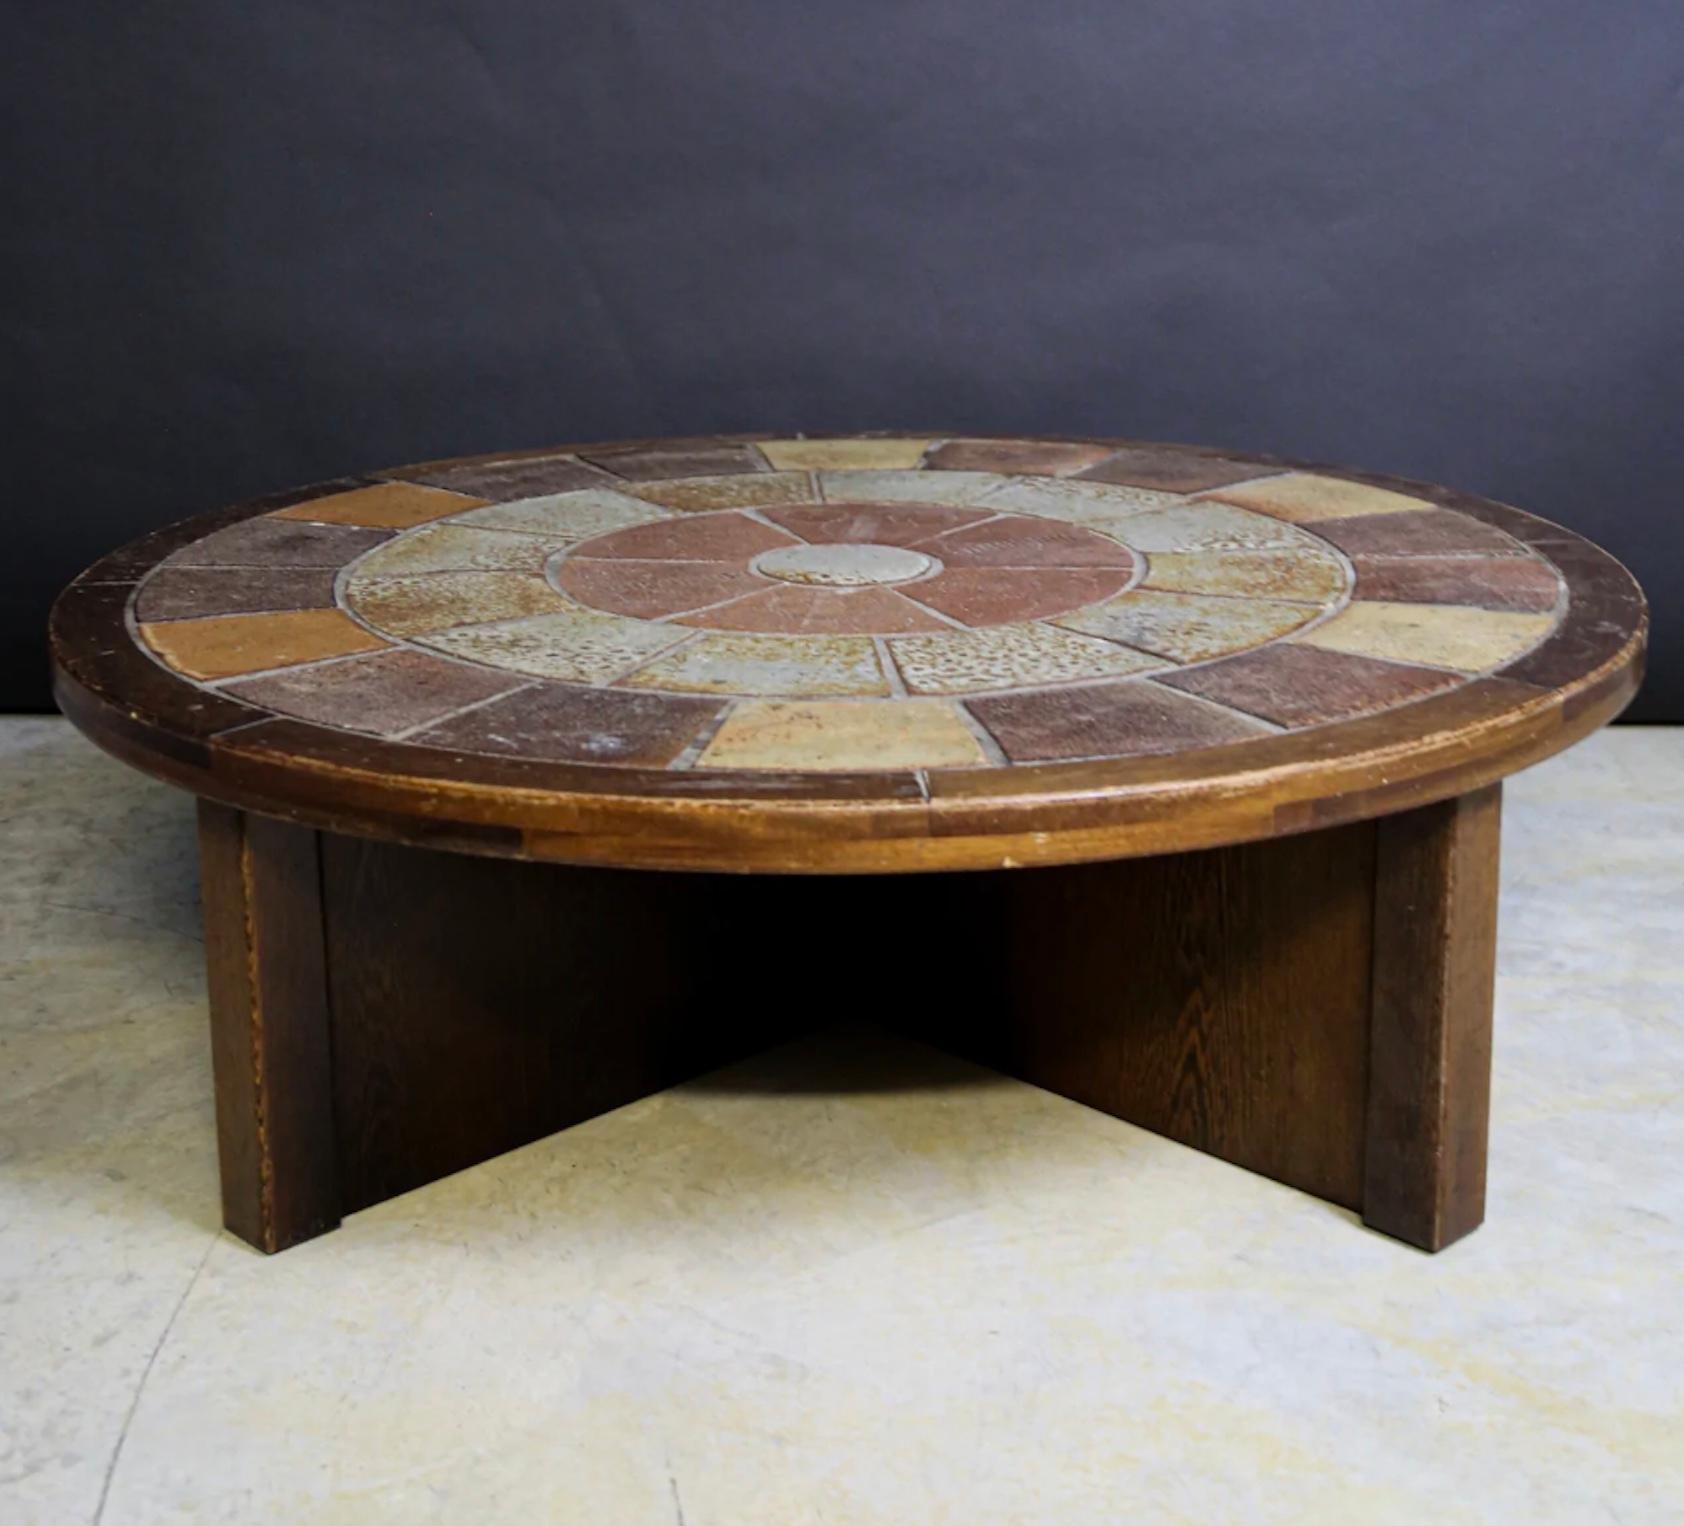 1960's French antique Coffee Table with Tile Inlay In Fair Condition For Sale In Venice, CA